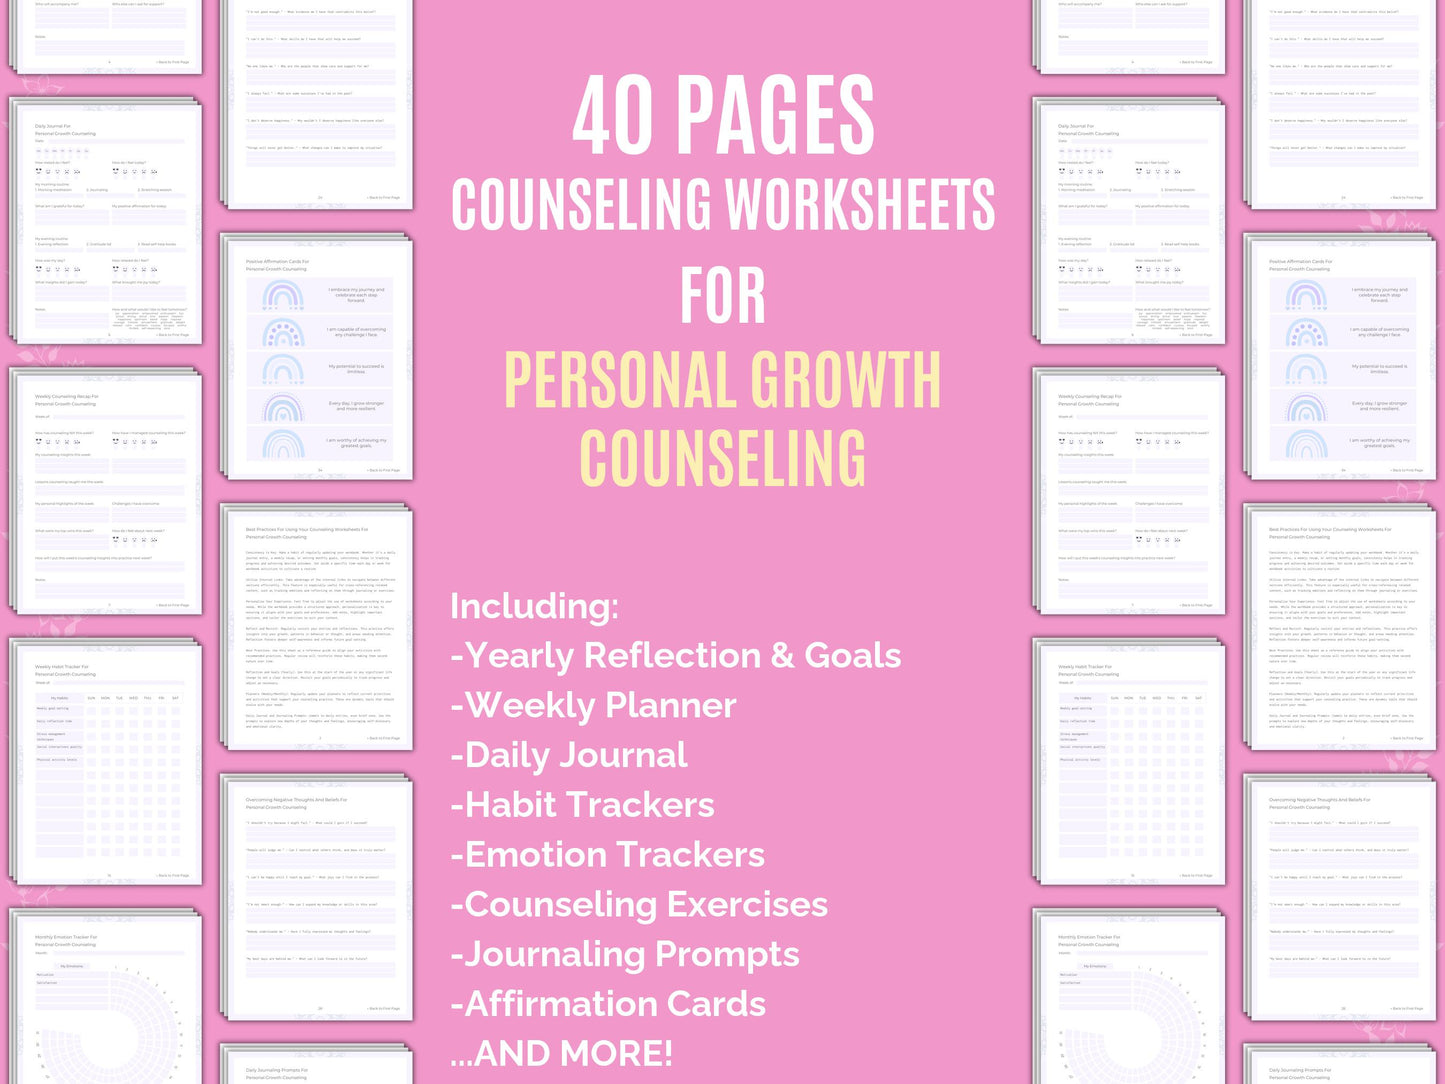 Personal Growth Counseling Cards